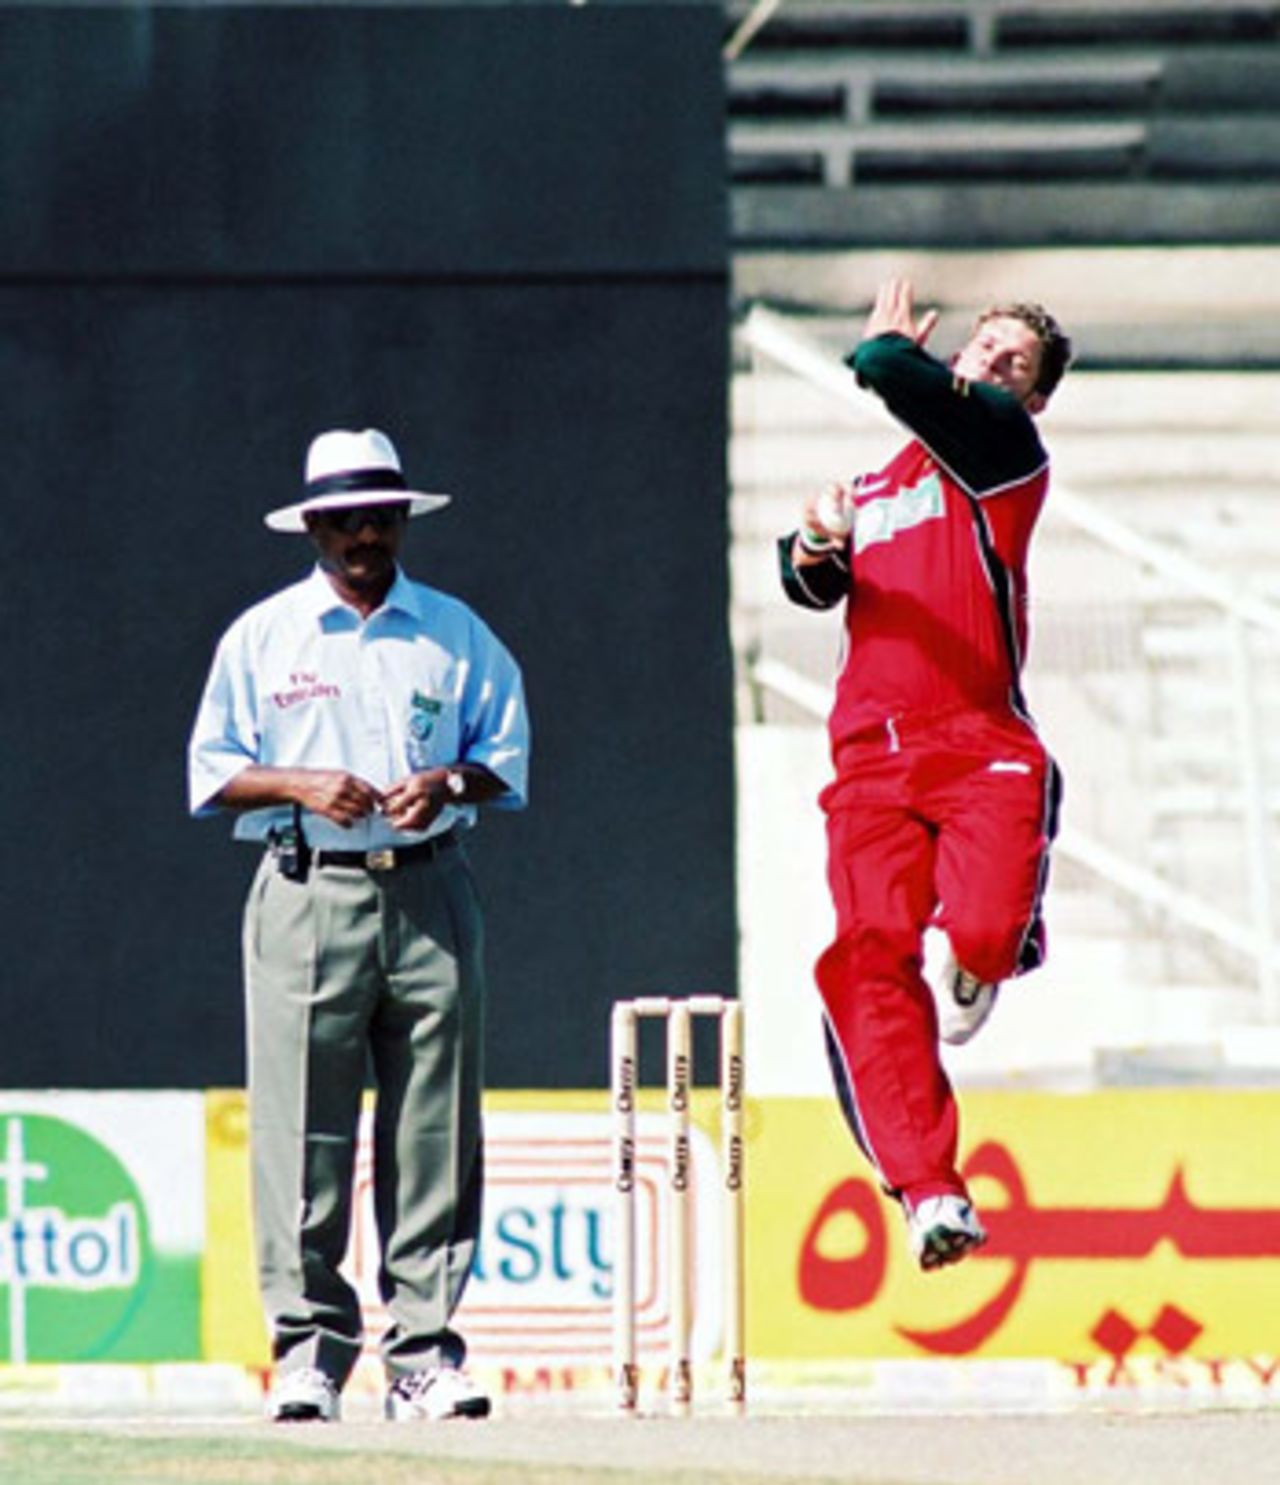 Andy Blignaut in his follow through, 1st Match: Pakistan v Zimbabwe, Cherry Blossom Sharjah Cup, 3 April 2003